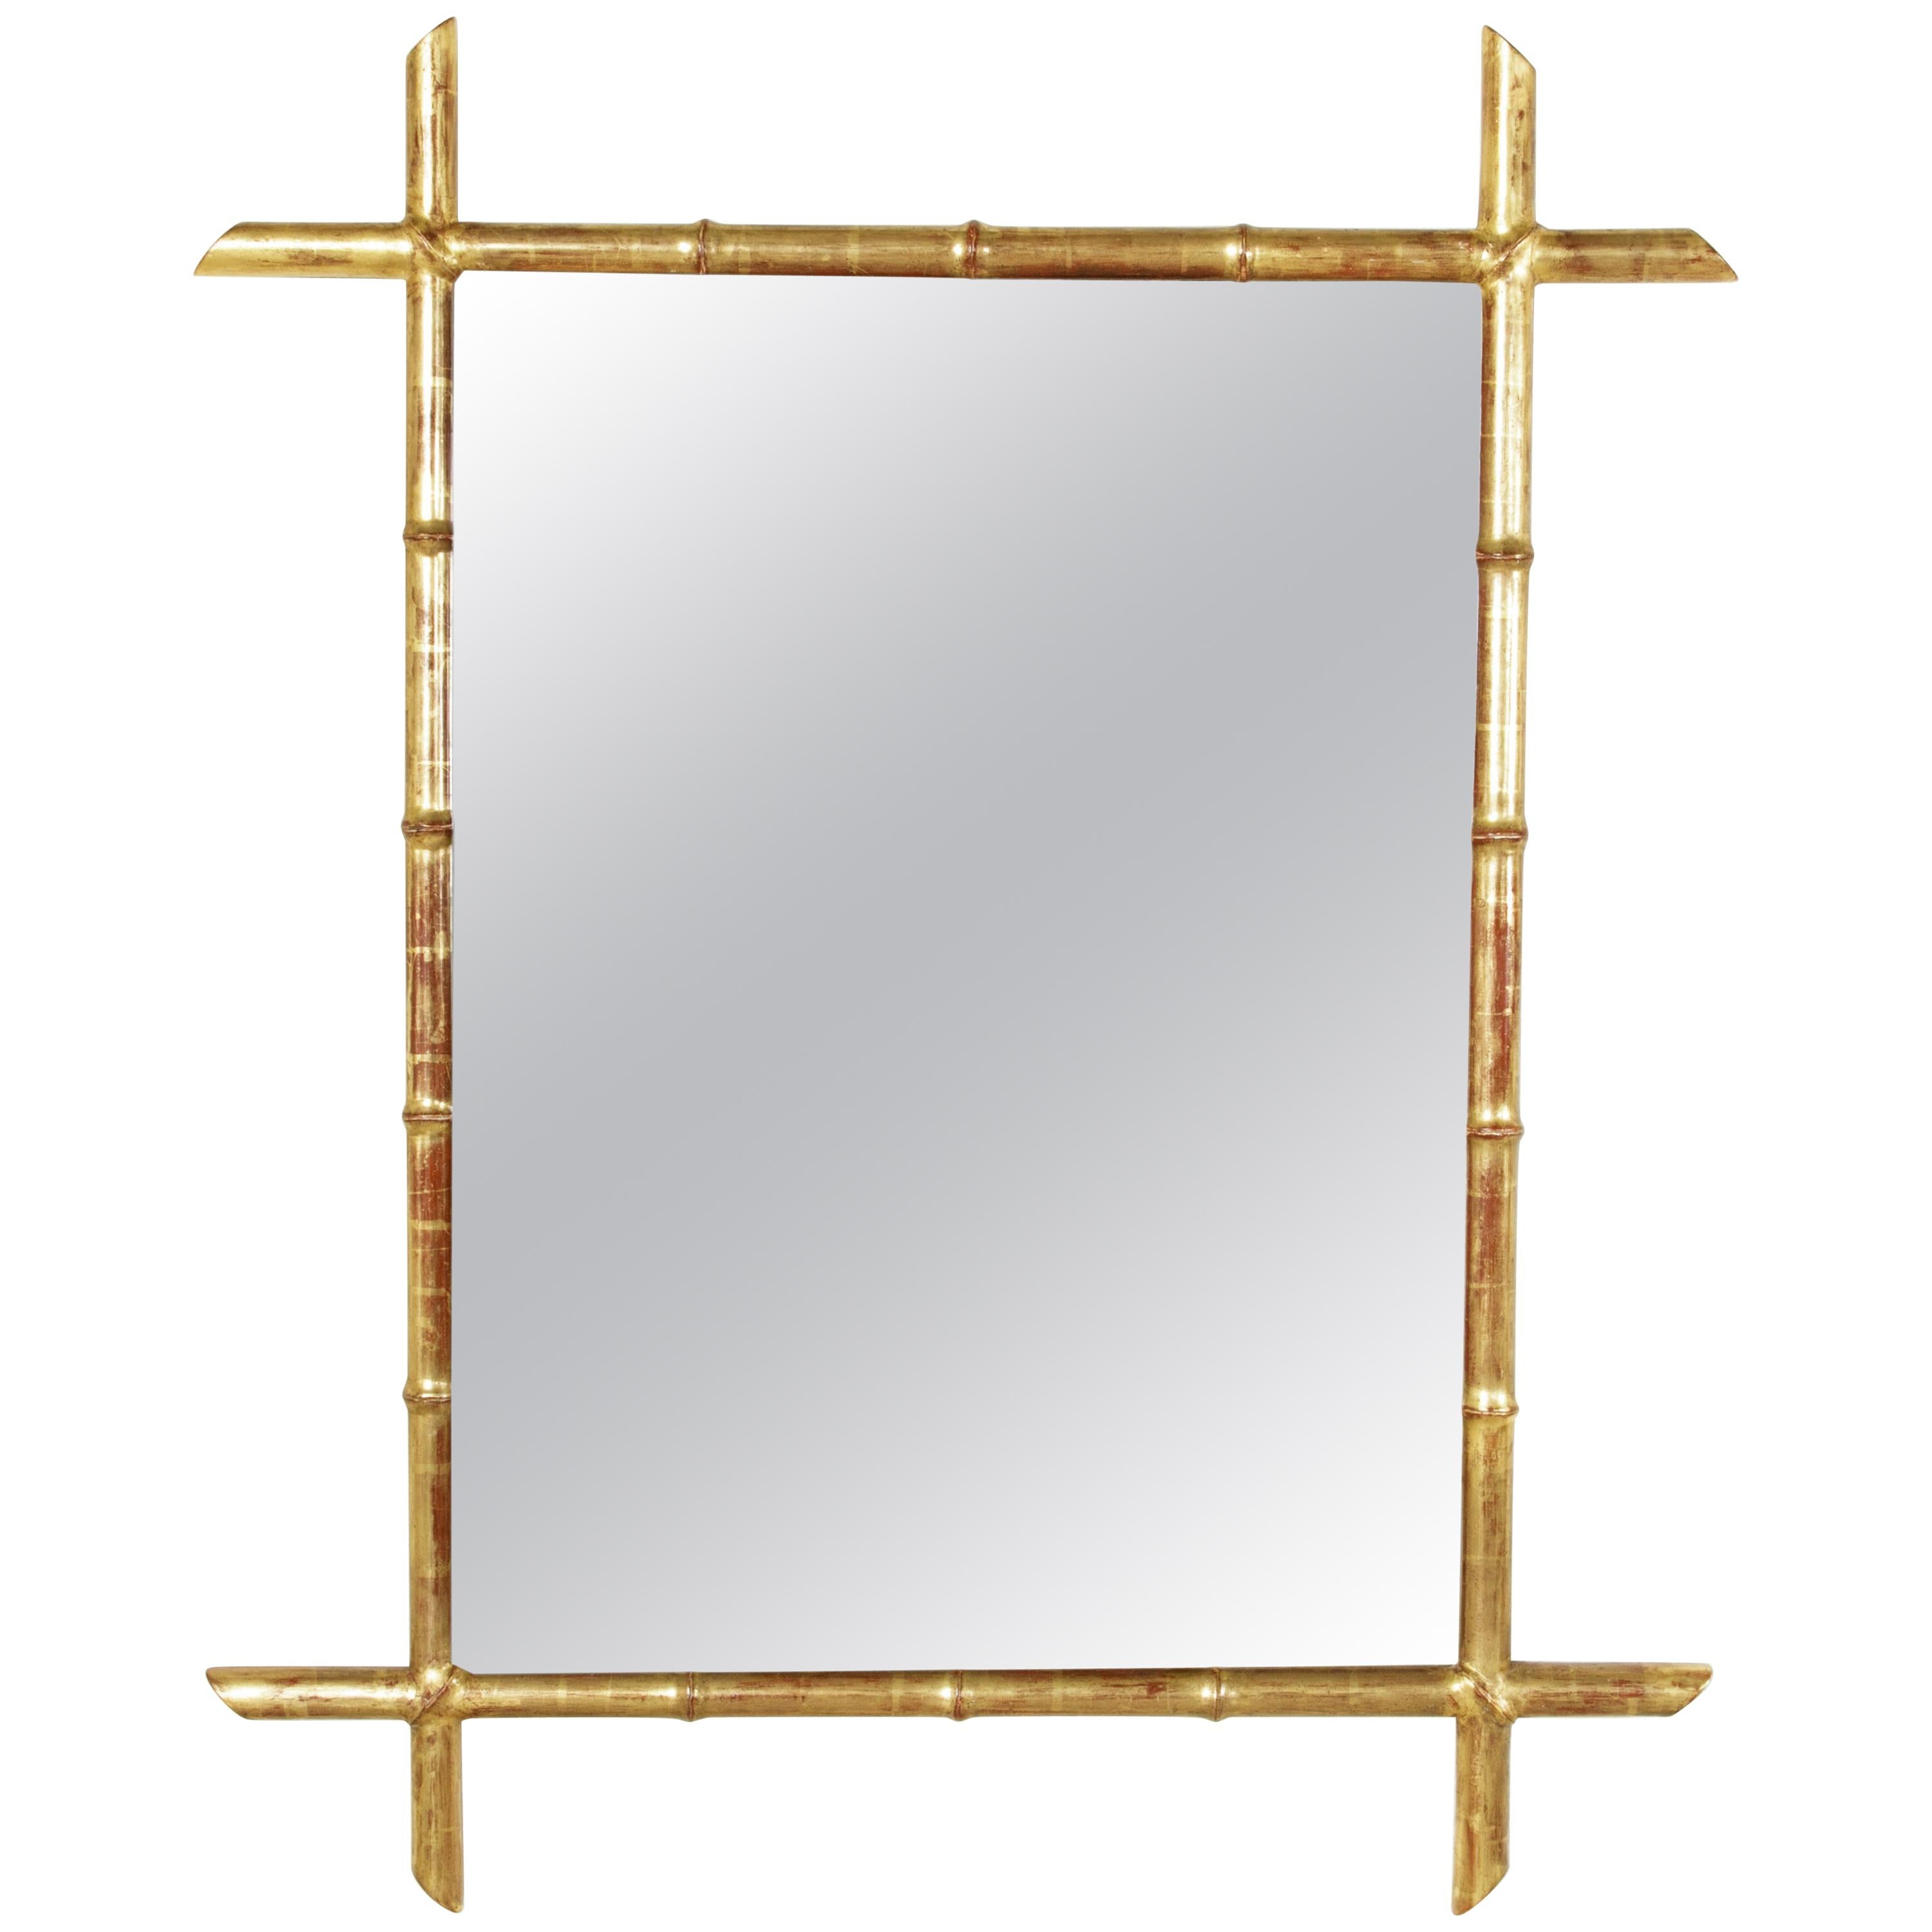 Late 19th Century French Giltwood Faux Bamboo Mirror with Beveled Glass